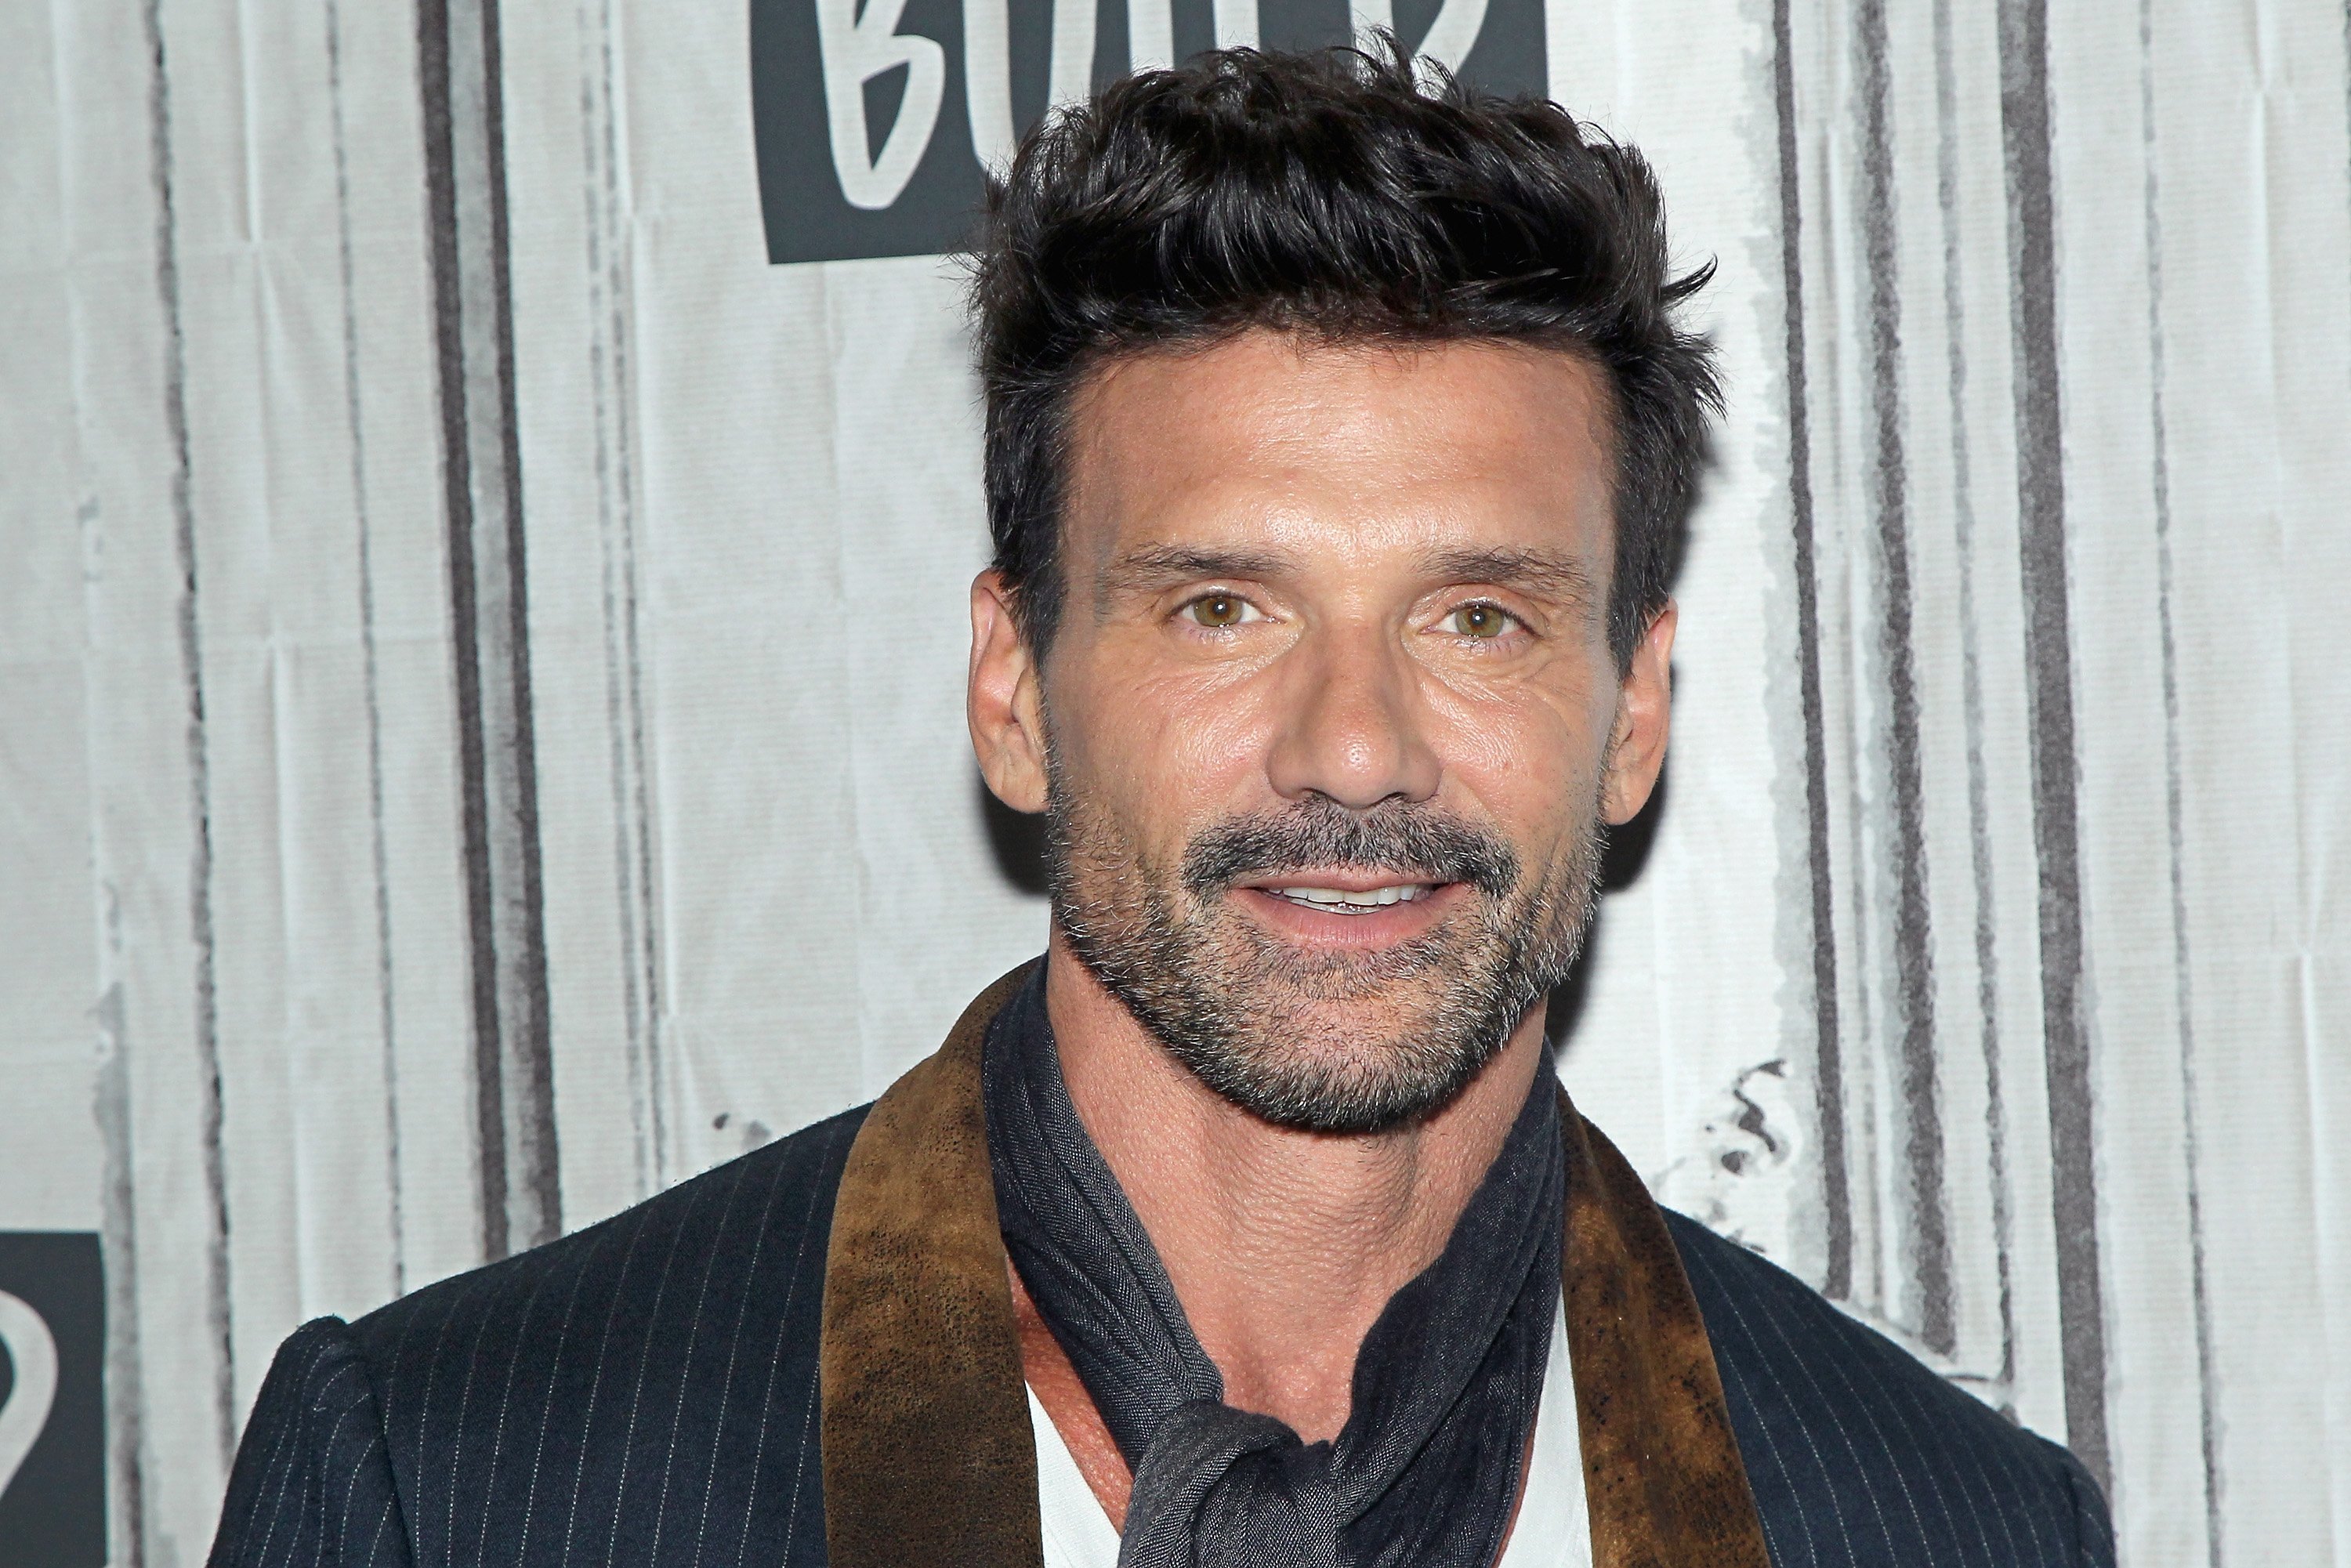 Frank Grillo, in a black jacket and black scarf, at an event in 2018.